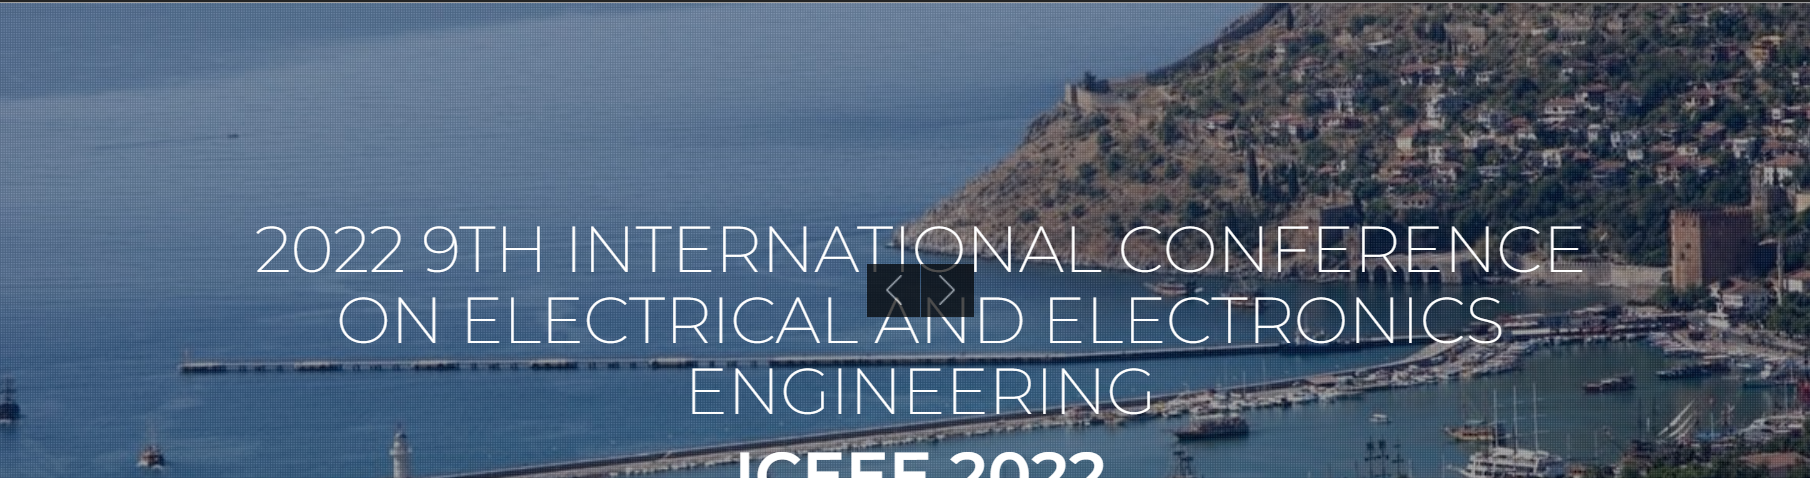 9. International Conference On Electrical And Electronics Engineering-CEEE 2022